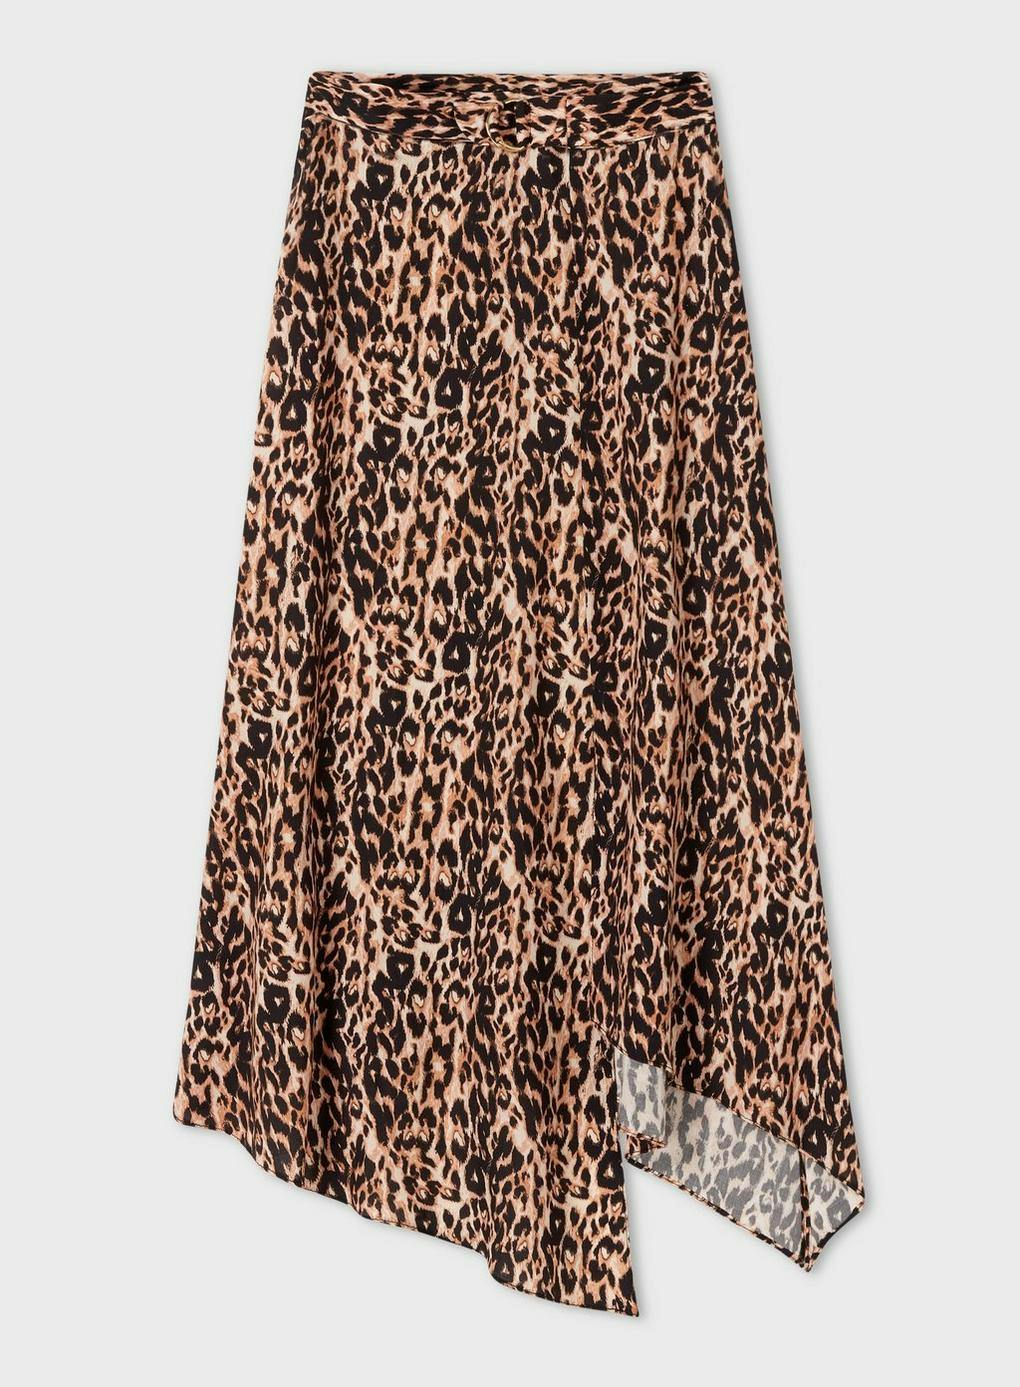 5 leopard print skirts to add to your winter wardrobe now